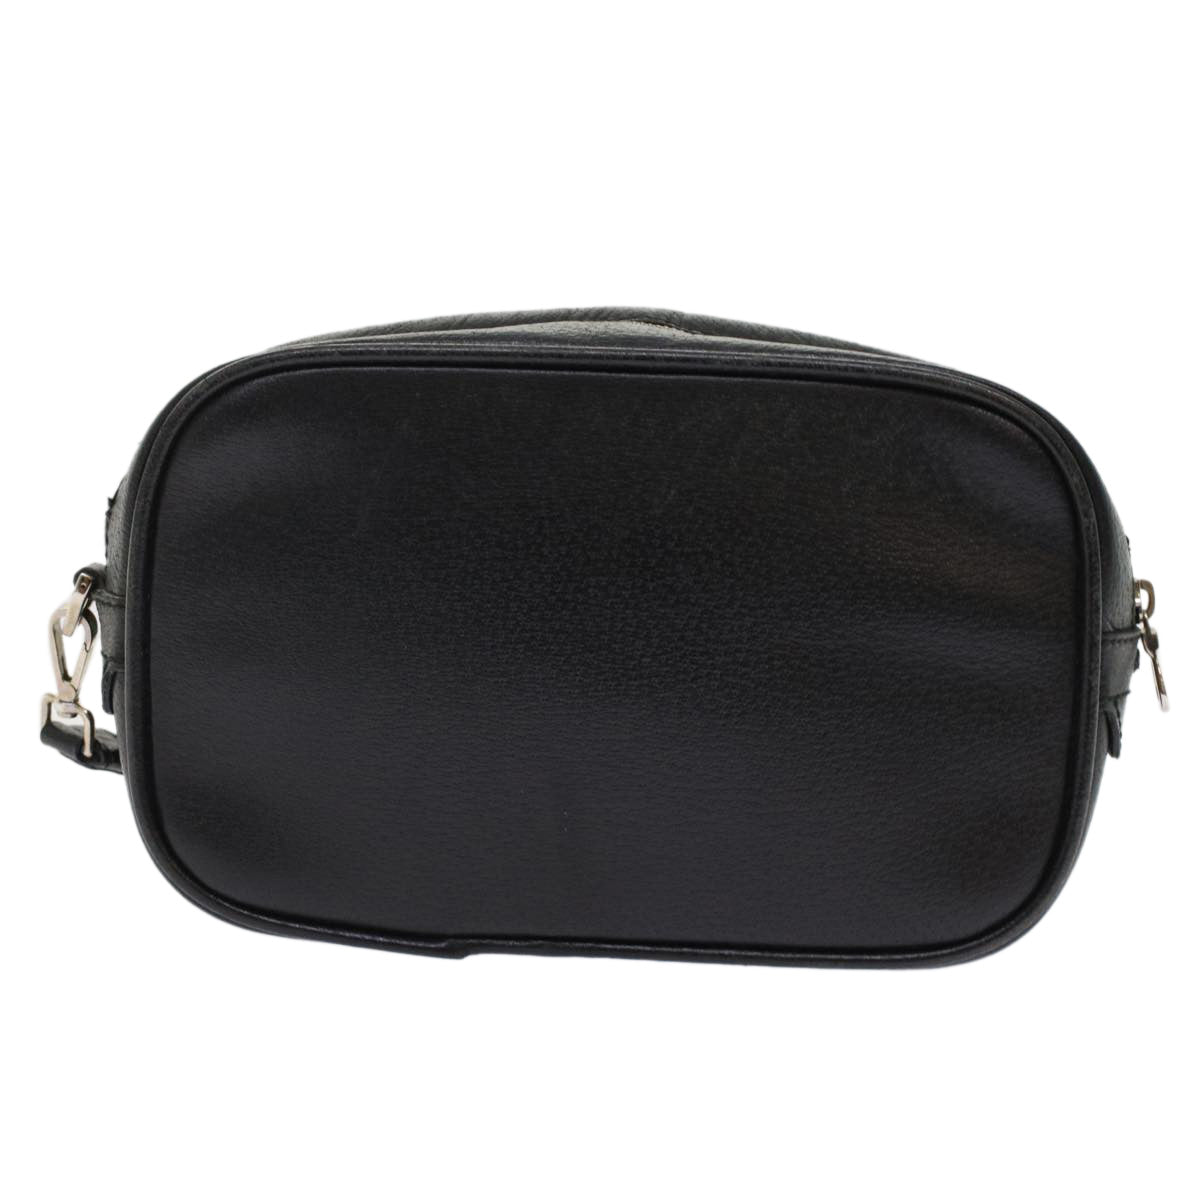 BALLY Clutch Bag Leather Black Auth bs7001 - 0